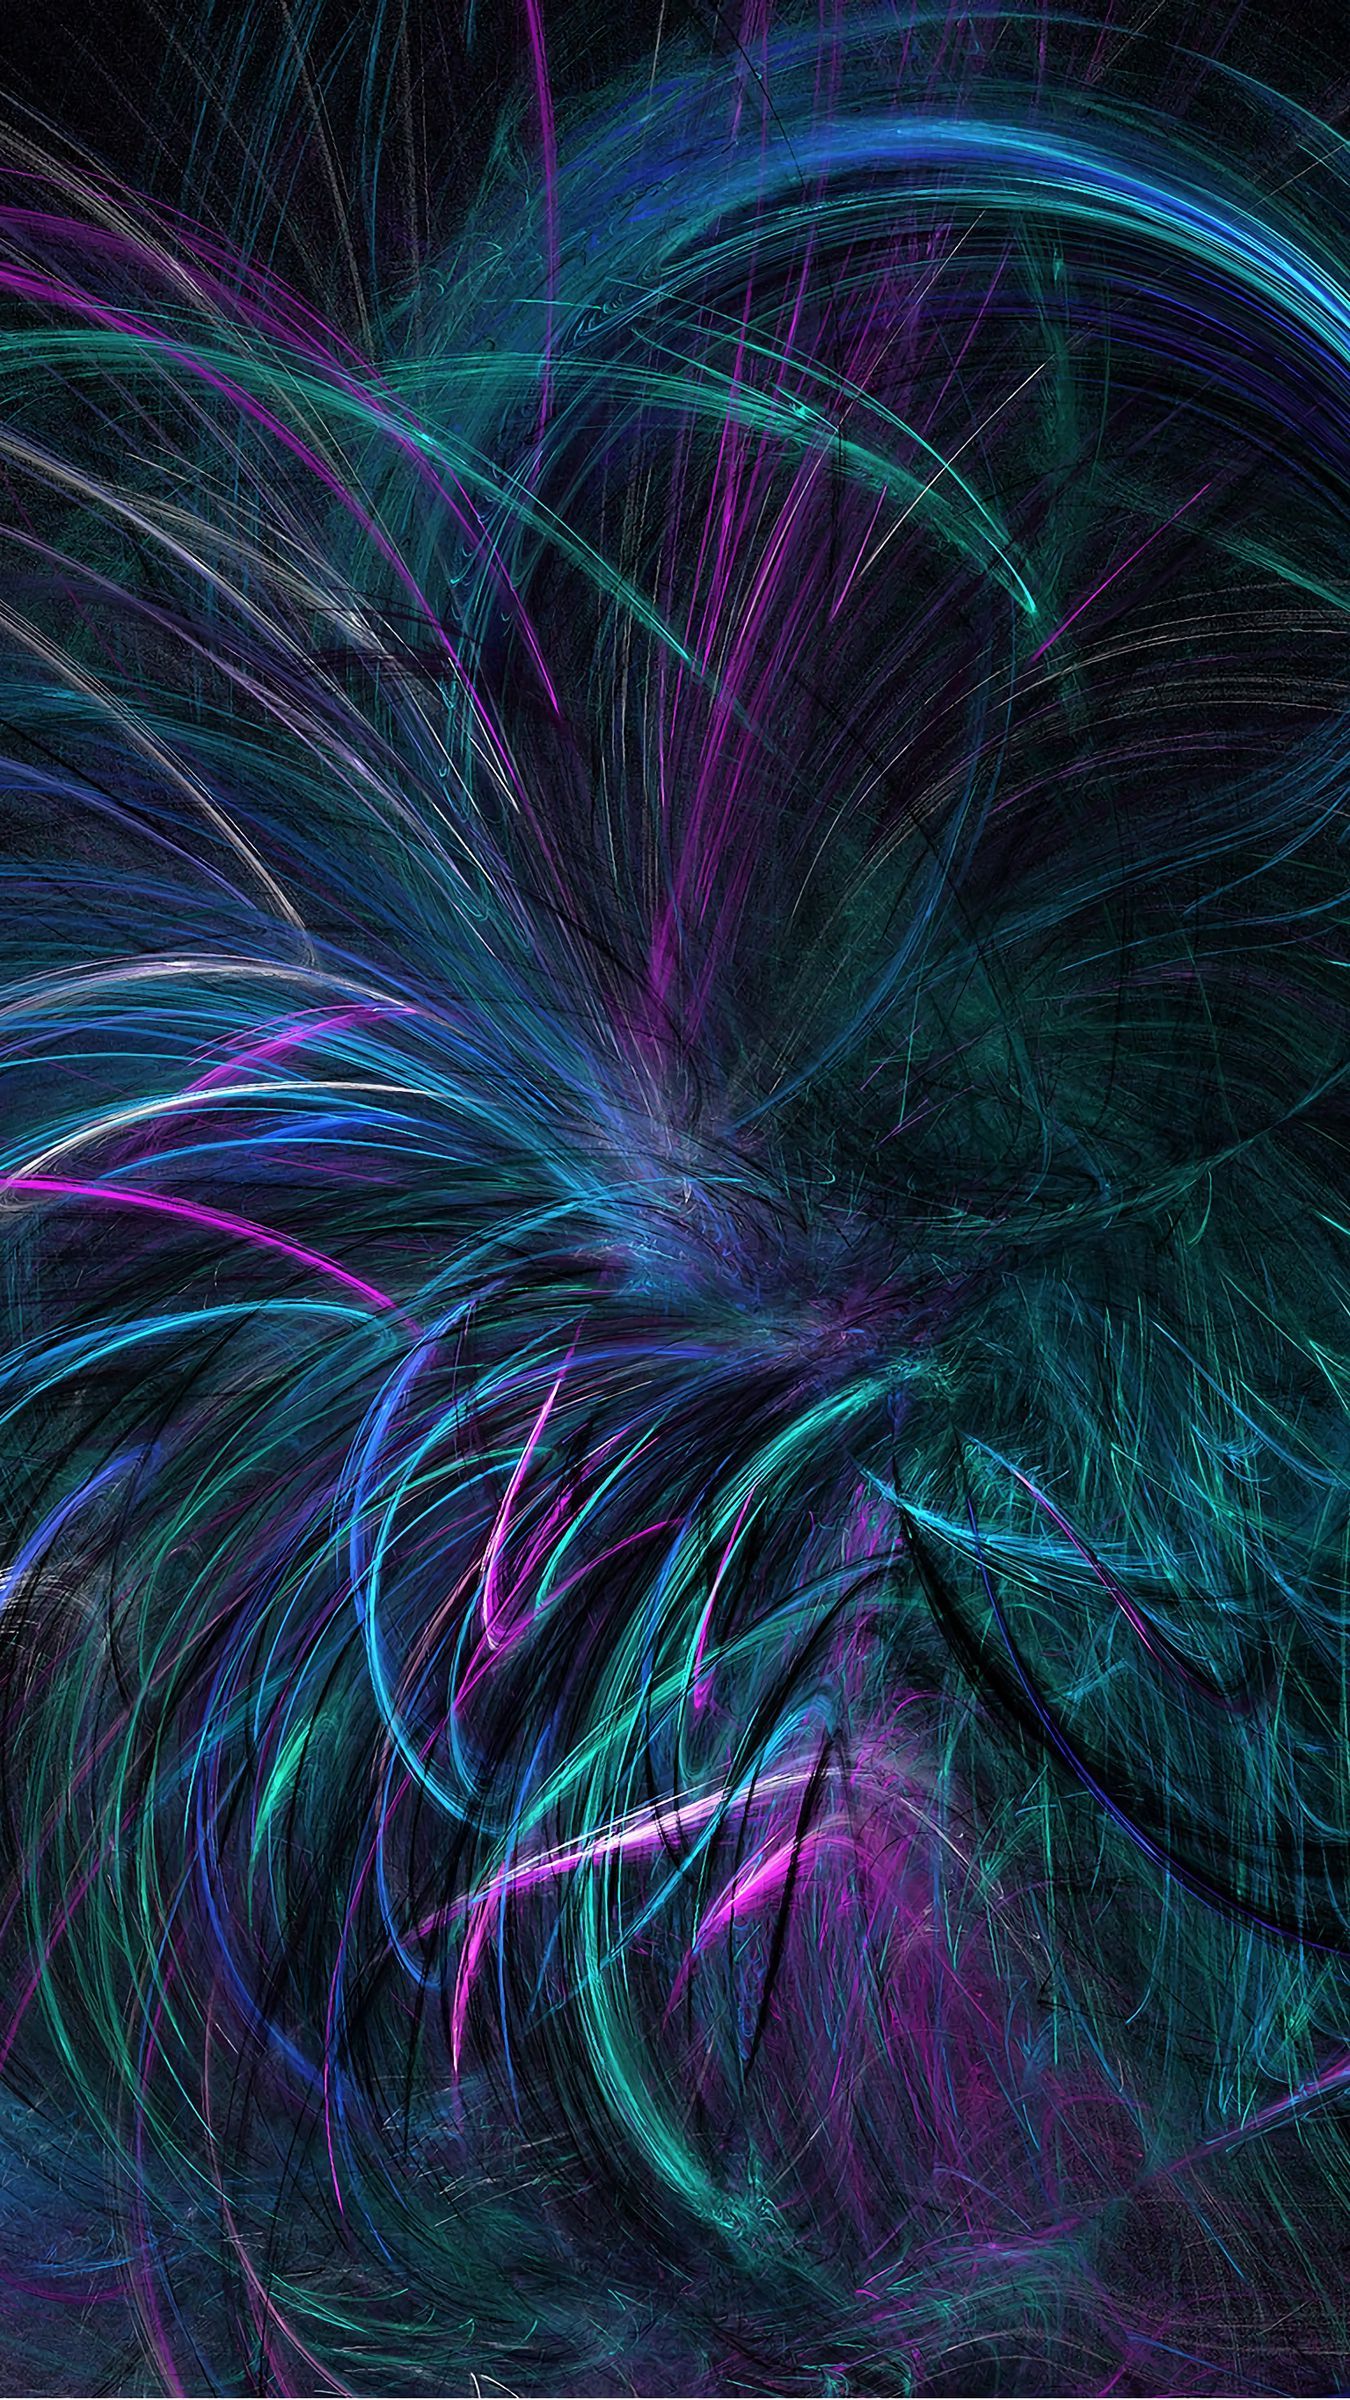 Download wallpaper 1350x2400 fractal, lines, dark, violet, twisted iphone 8+/7+/6s+/for parallax HD background